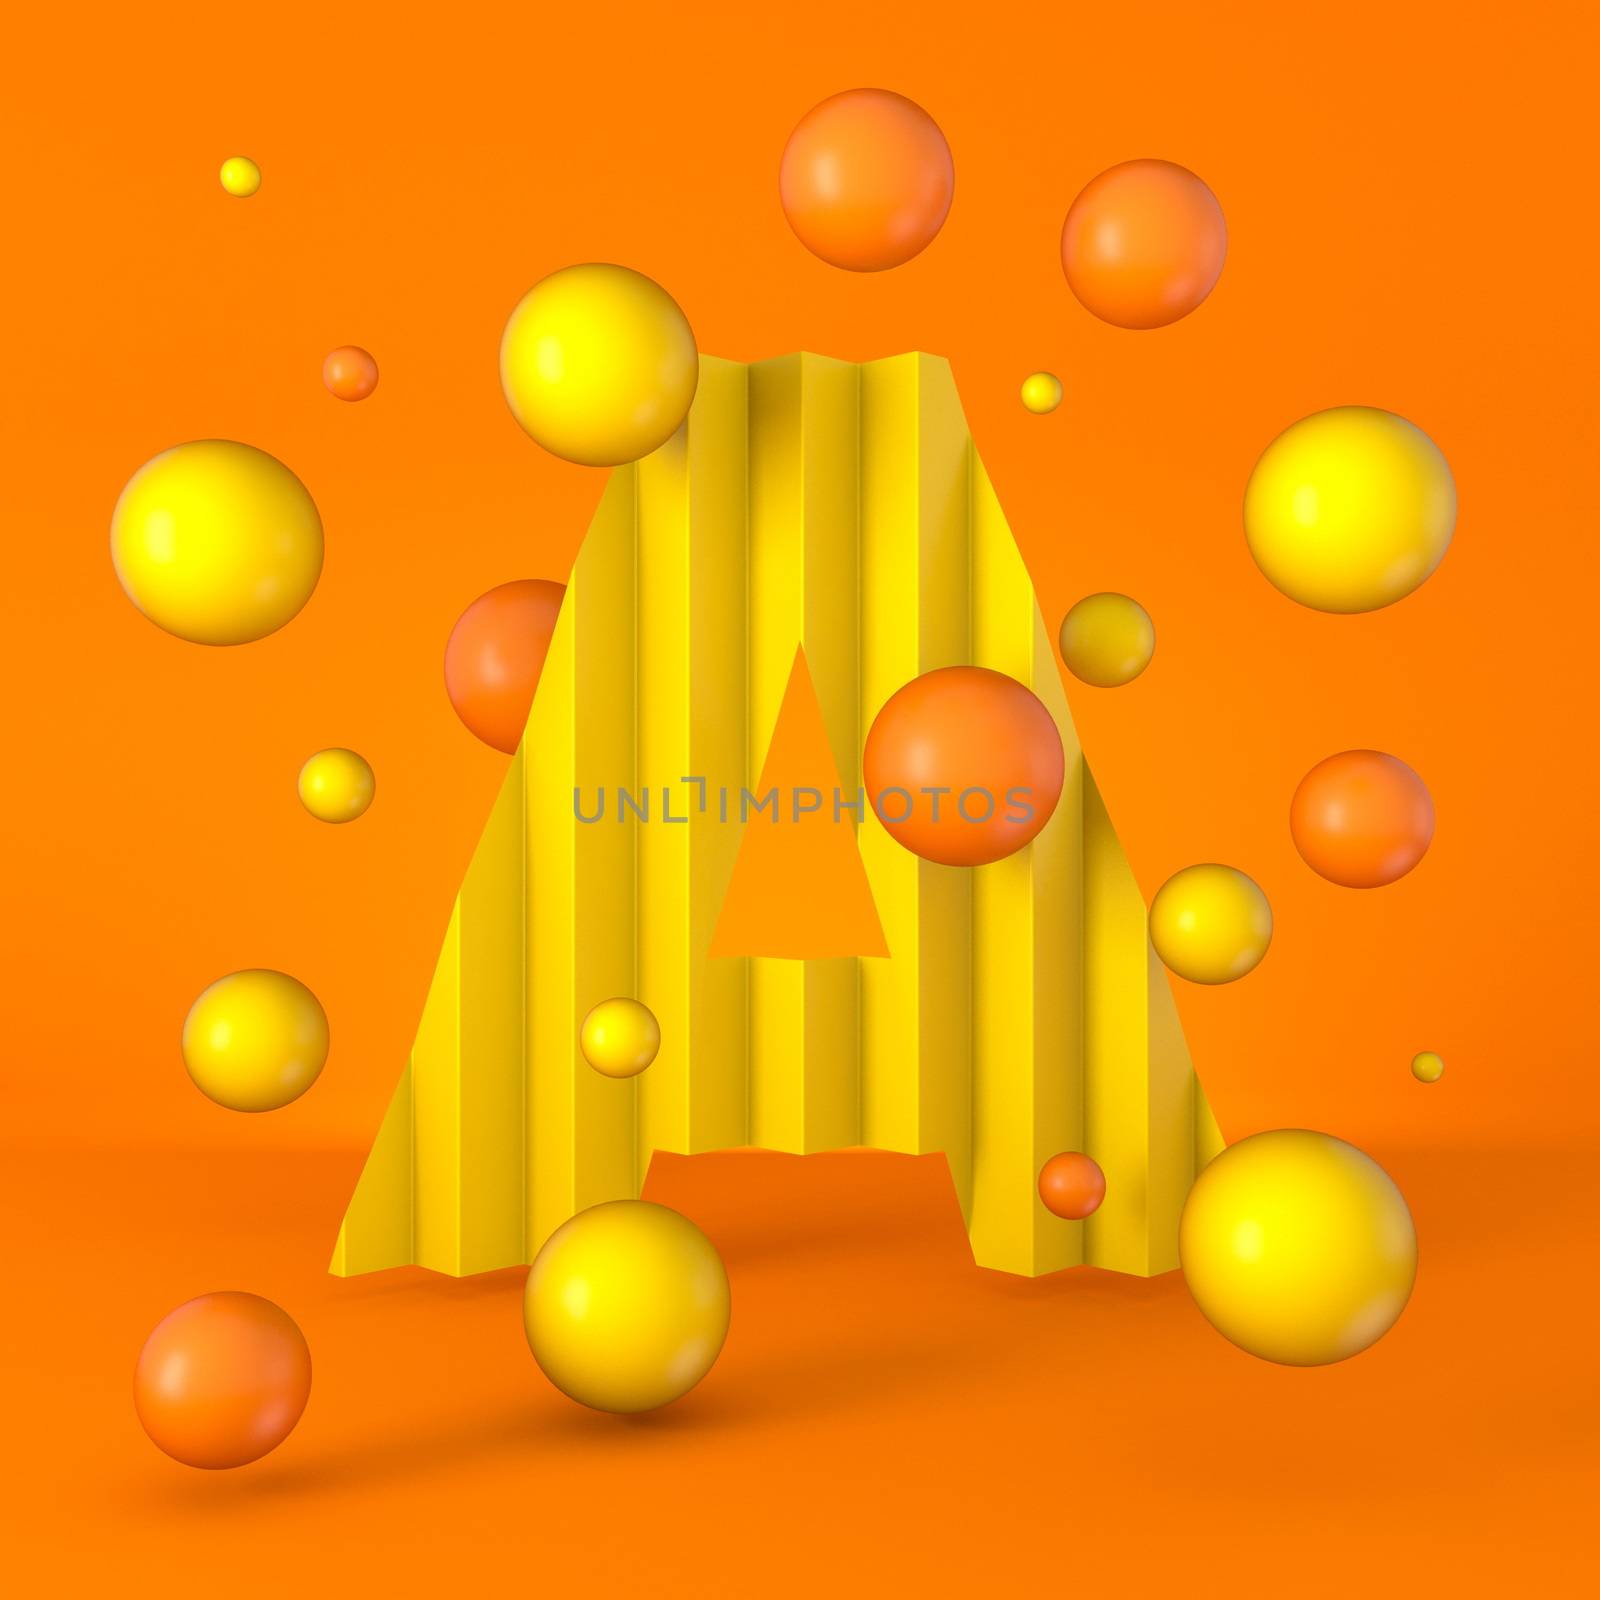 Warm minimal yellow sparkling font Letter A 3D render illustration isolated on orange background